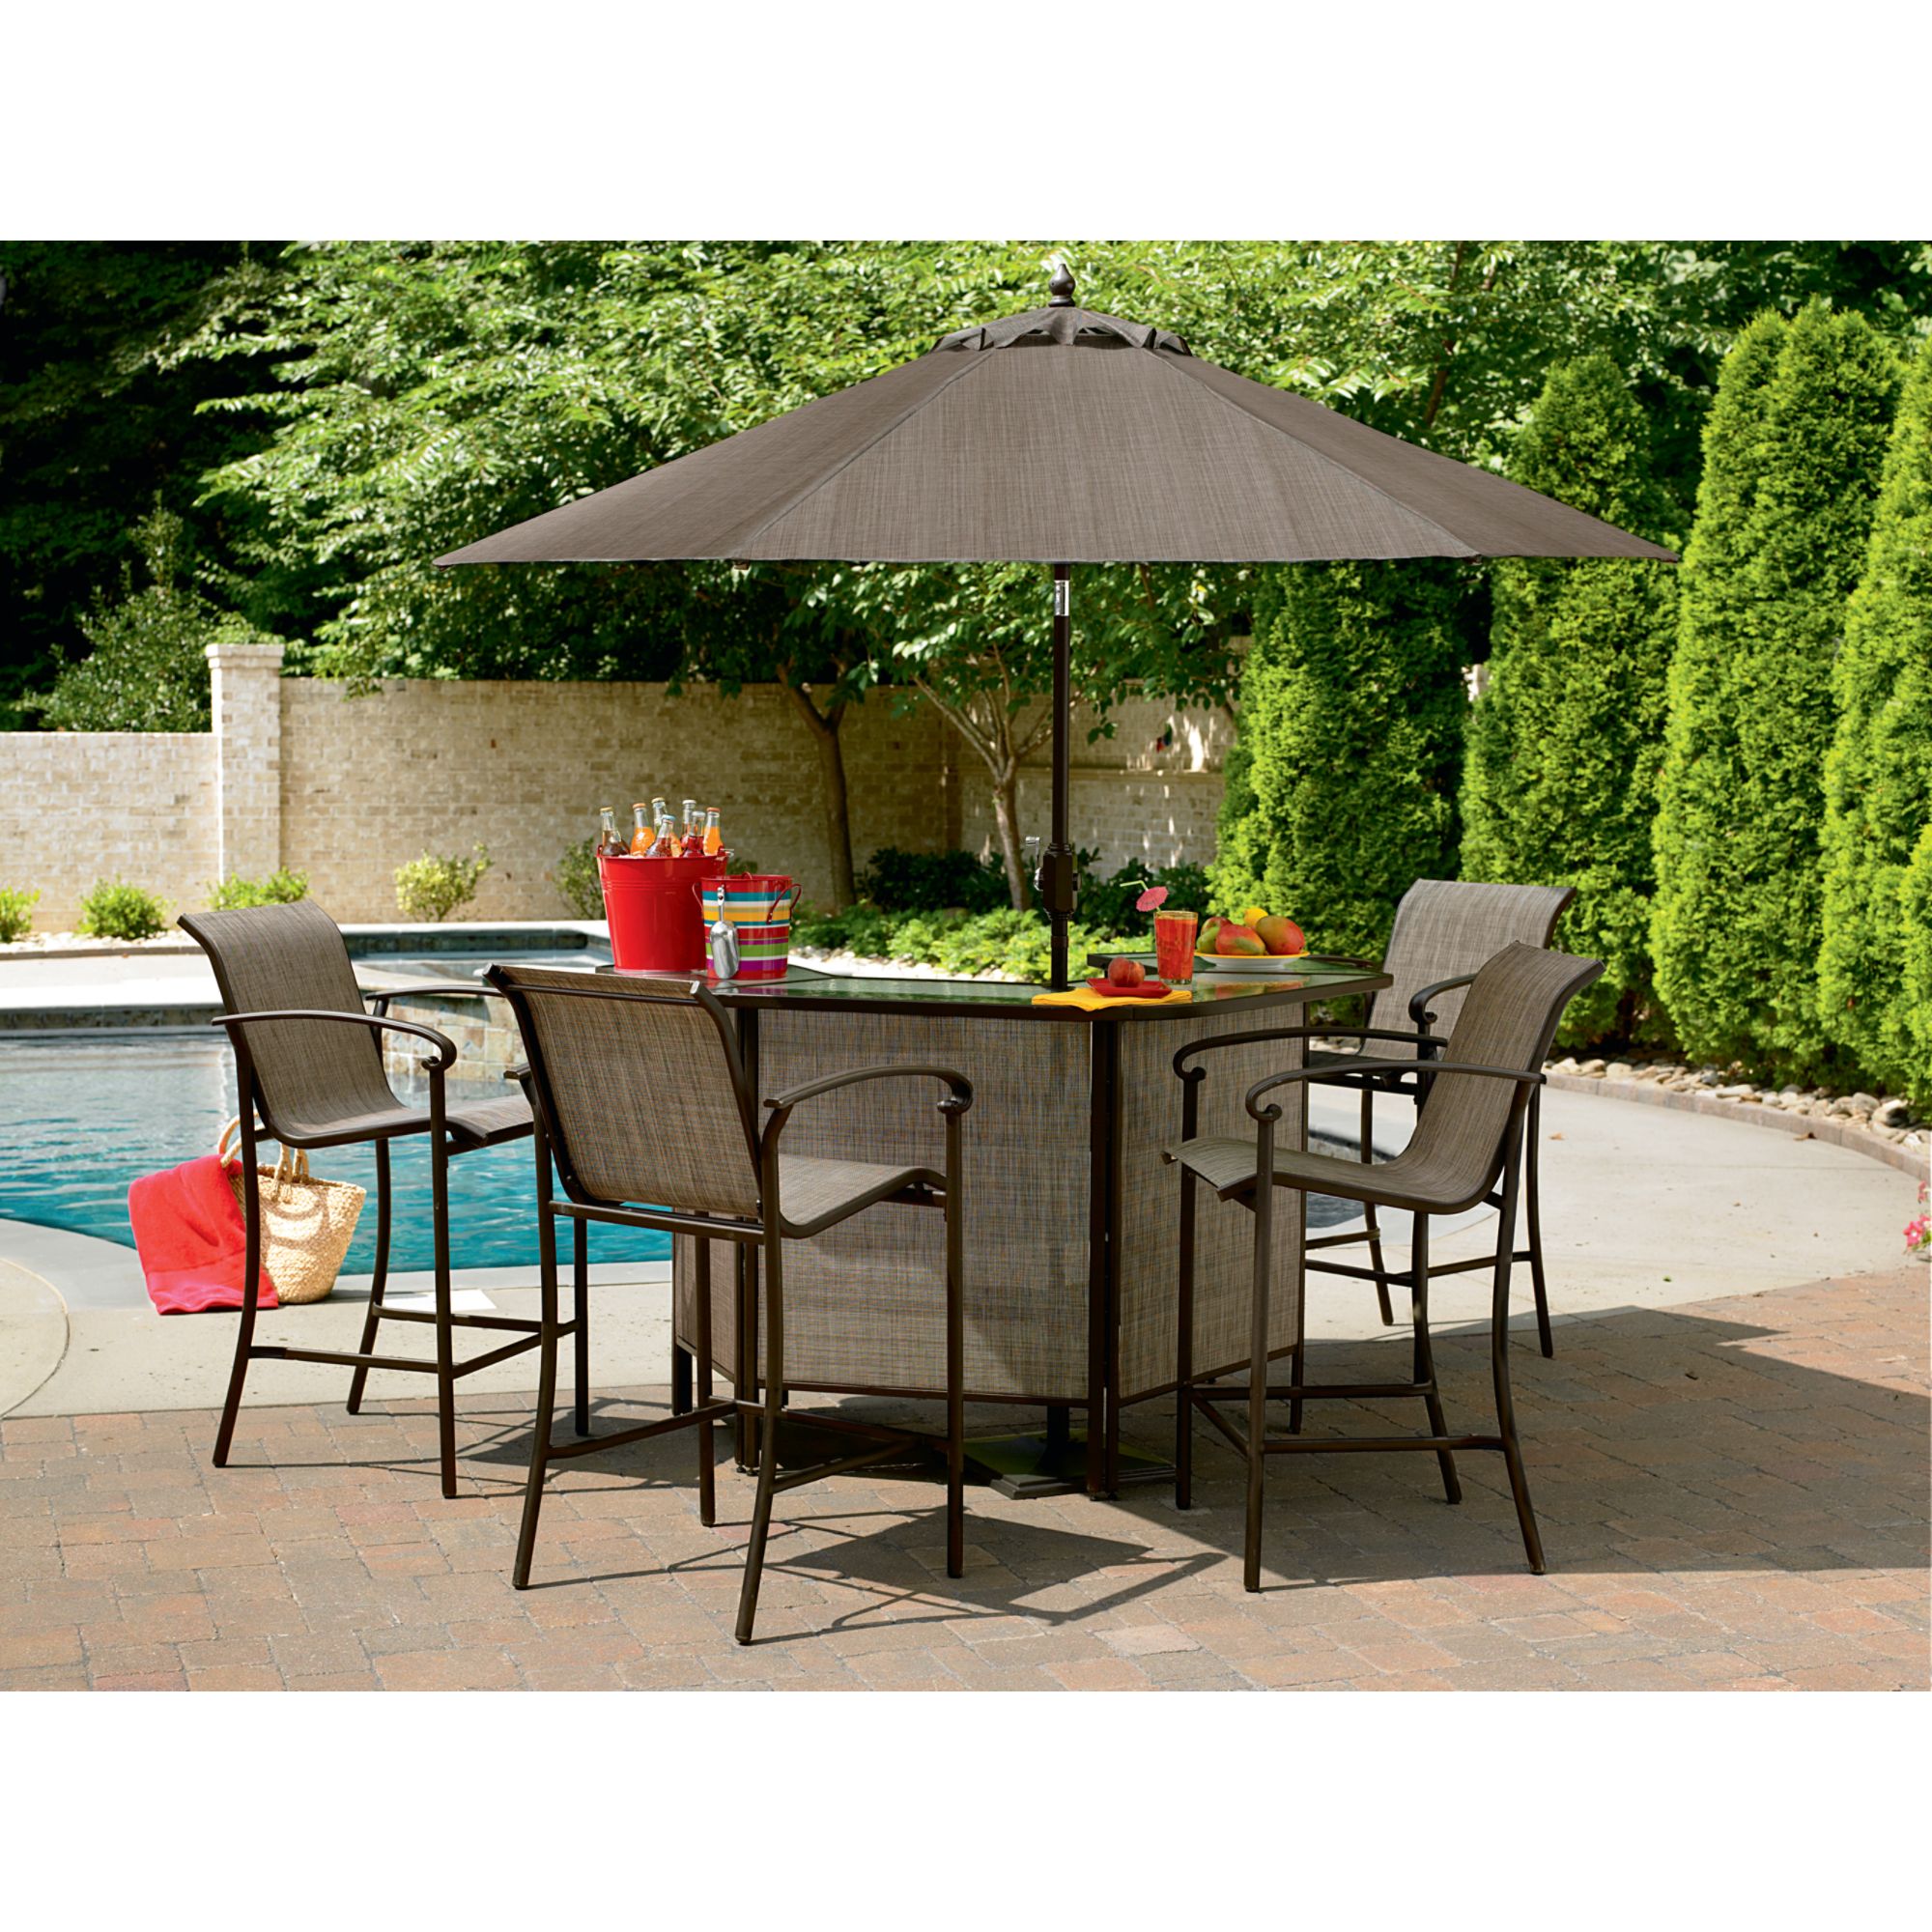 Garden Oasis 5 Piece Patio Bar Set: Have Fun Hosting with Sears